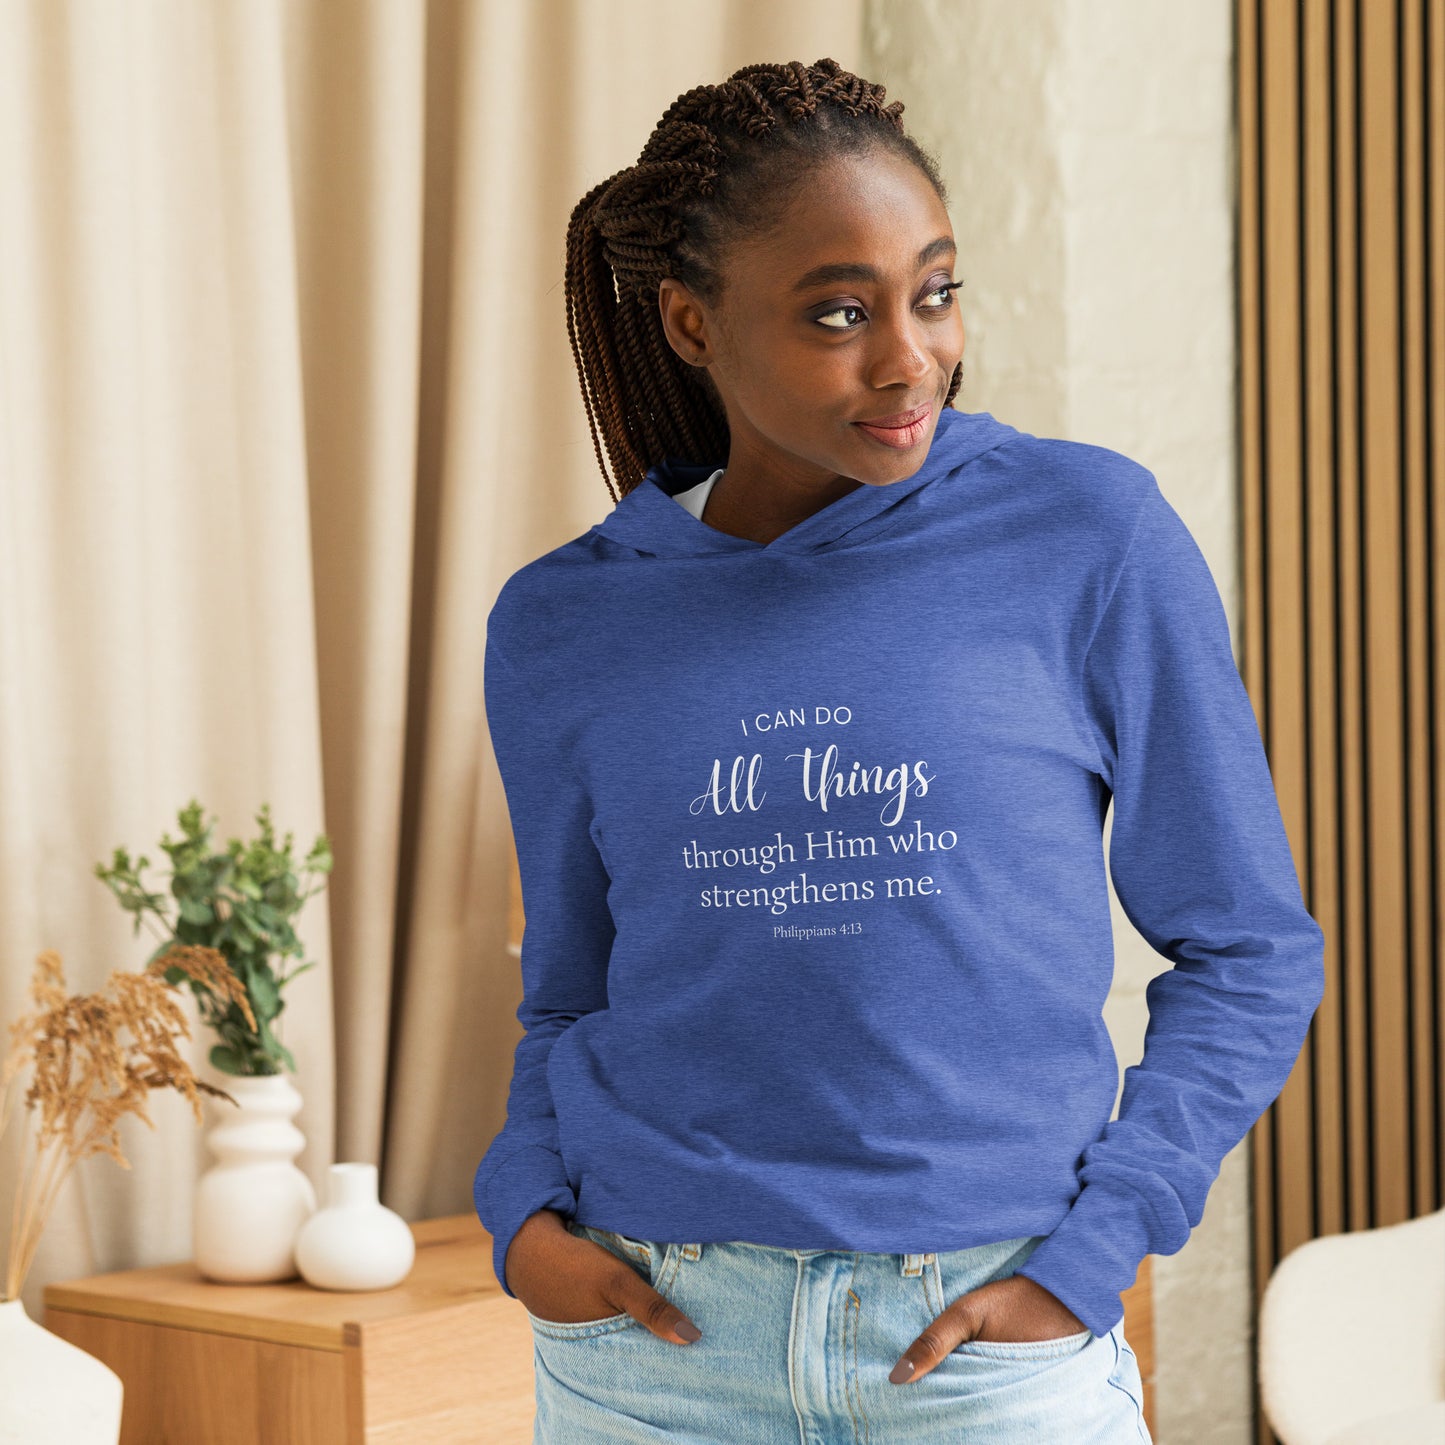 I can do all things | Unisex Hooded long-sleeve tee